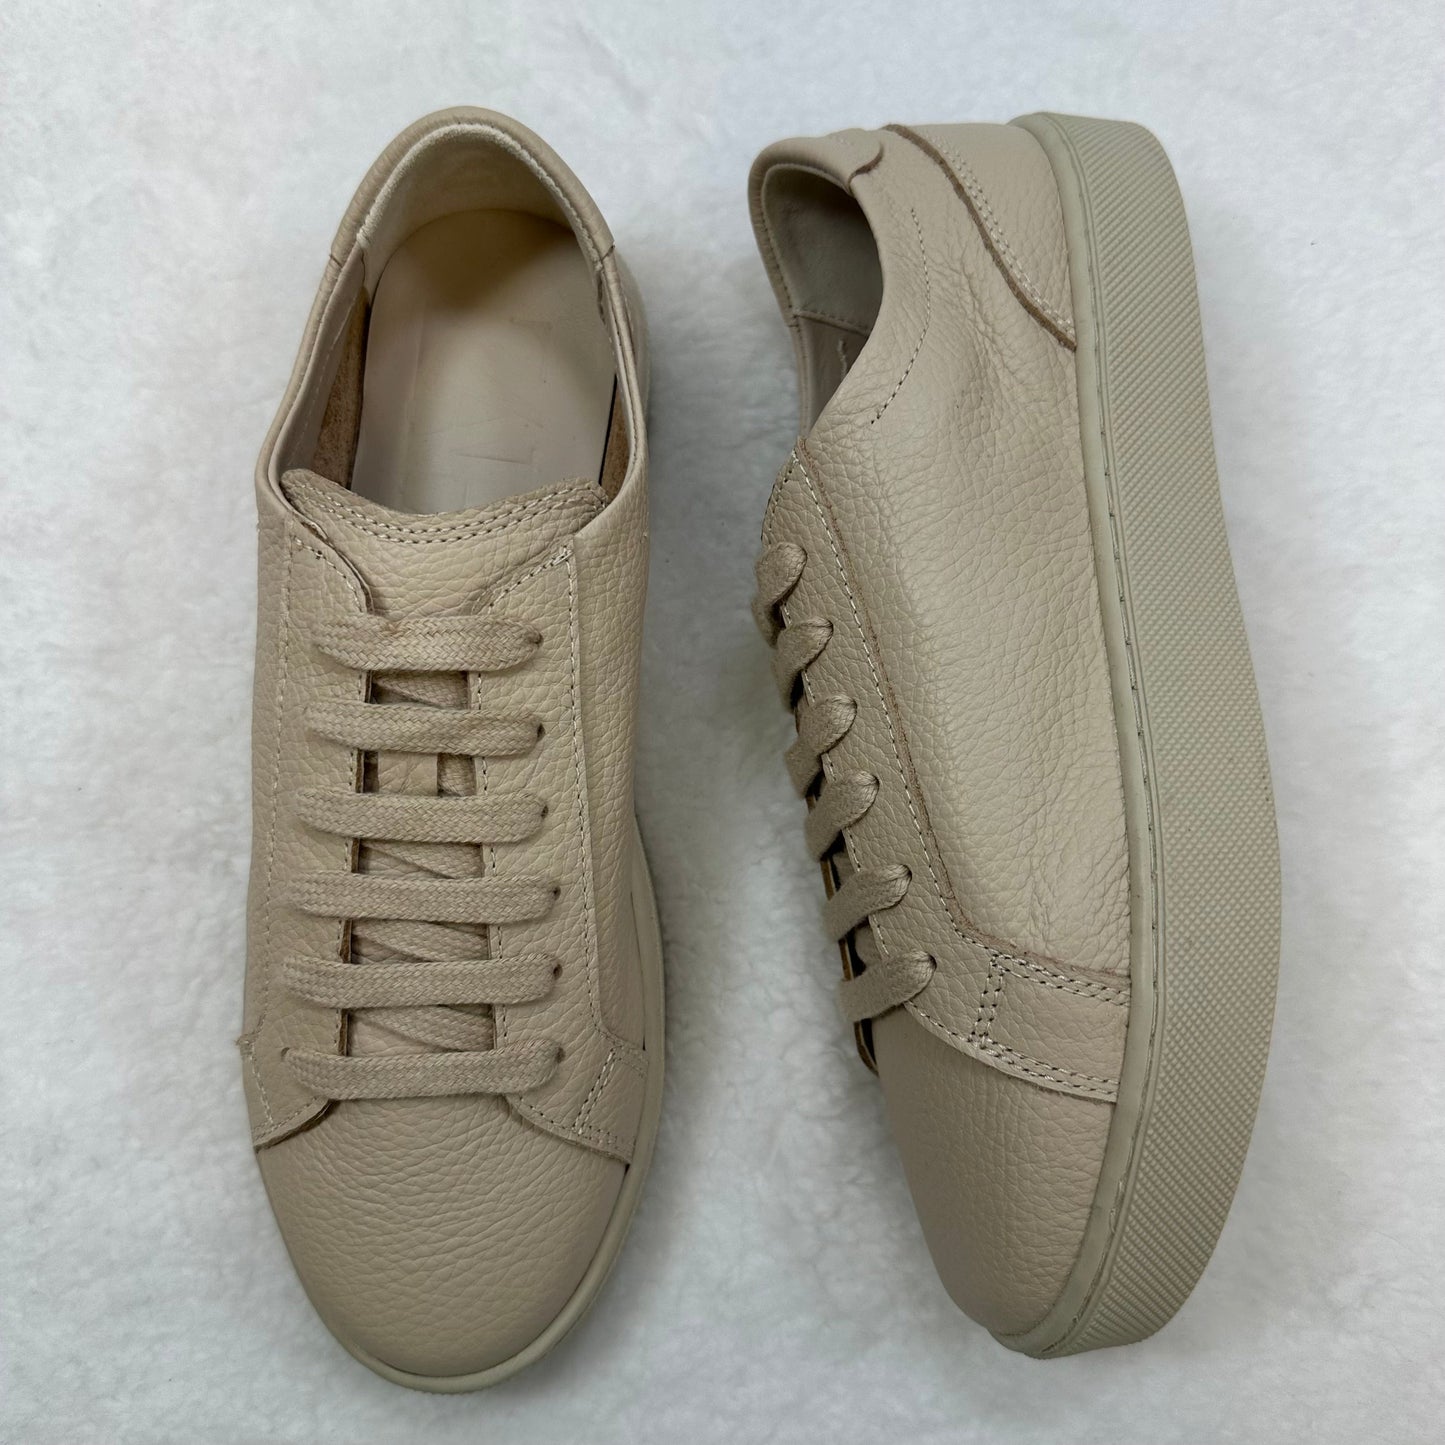 Shoes Sneakers By Zara size. 38